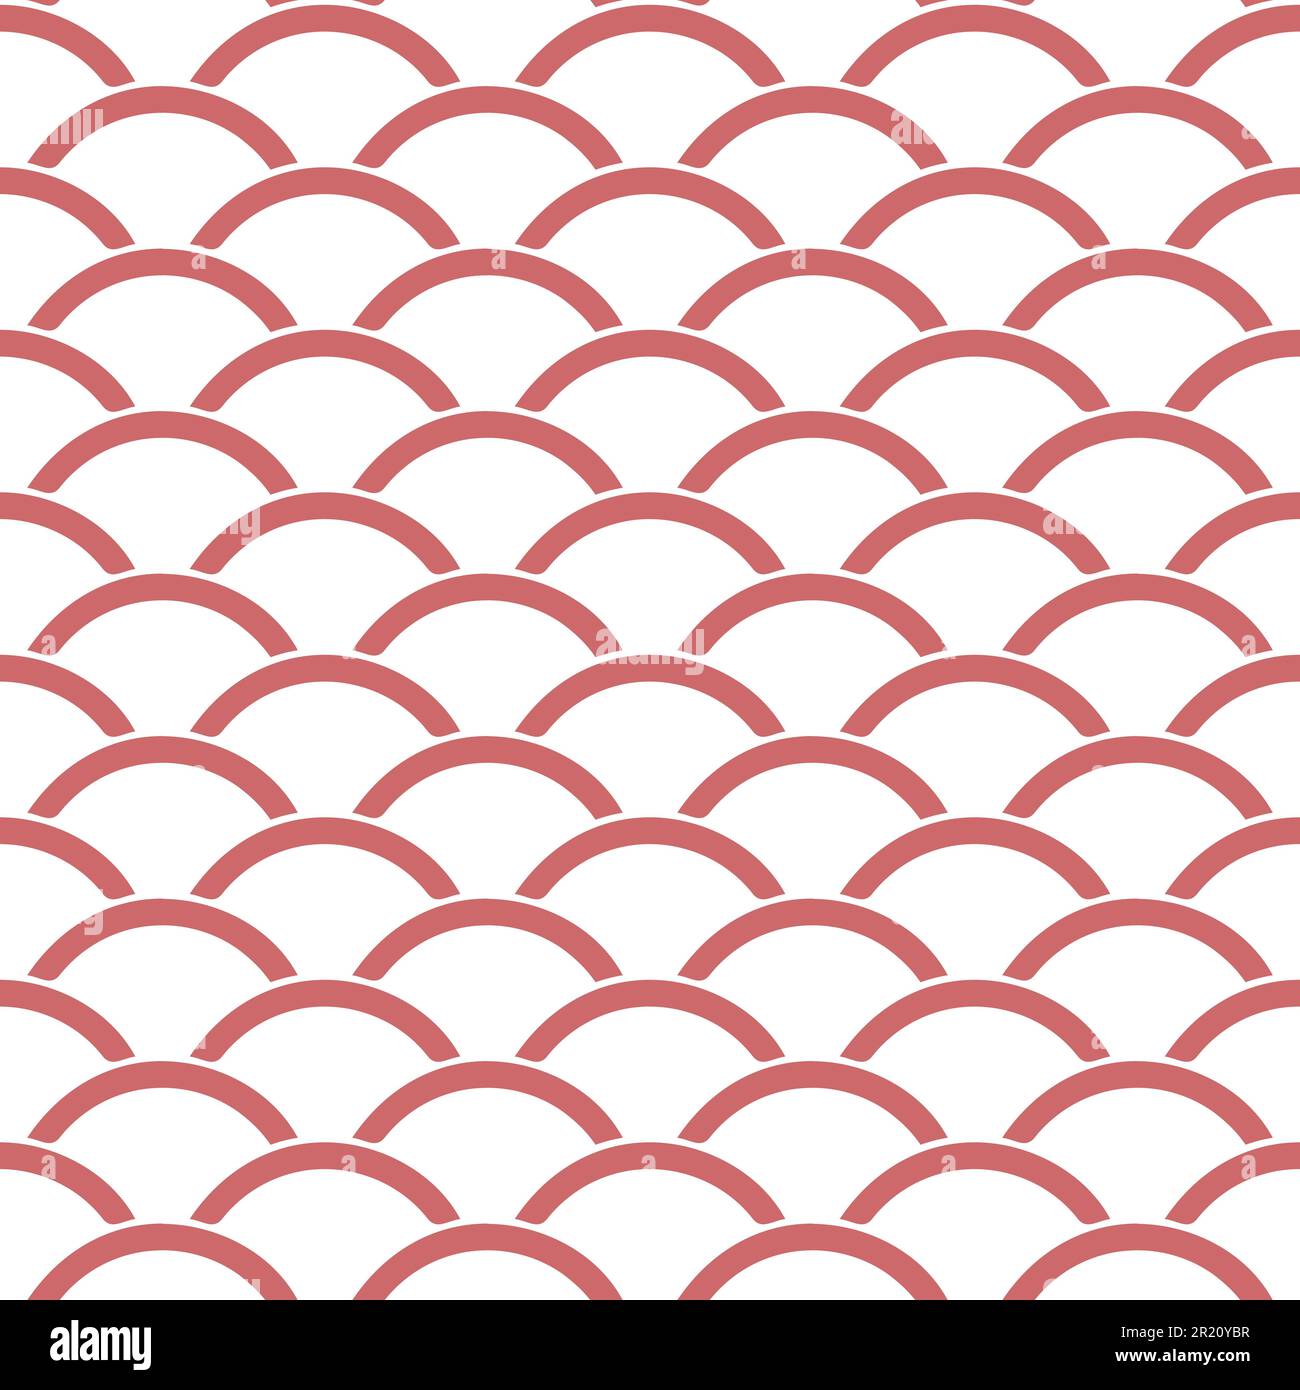 Seamless Pattern with Overlapping Circles Stock Vector